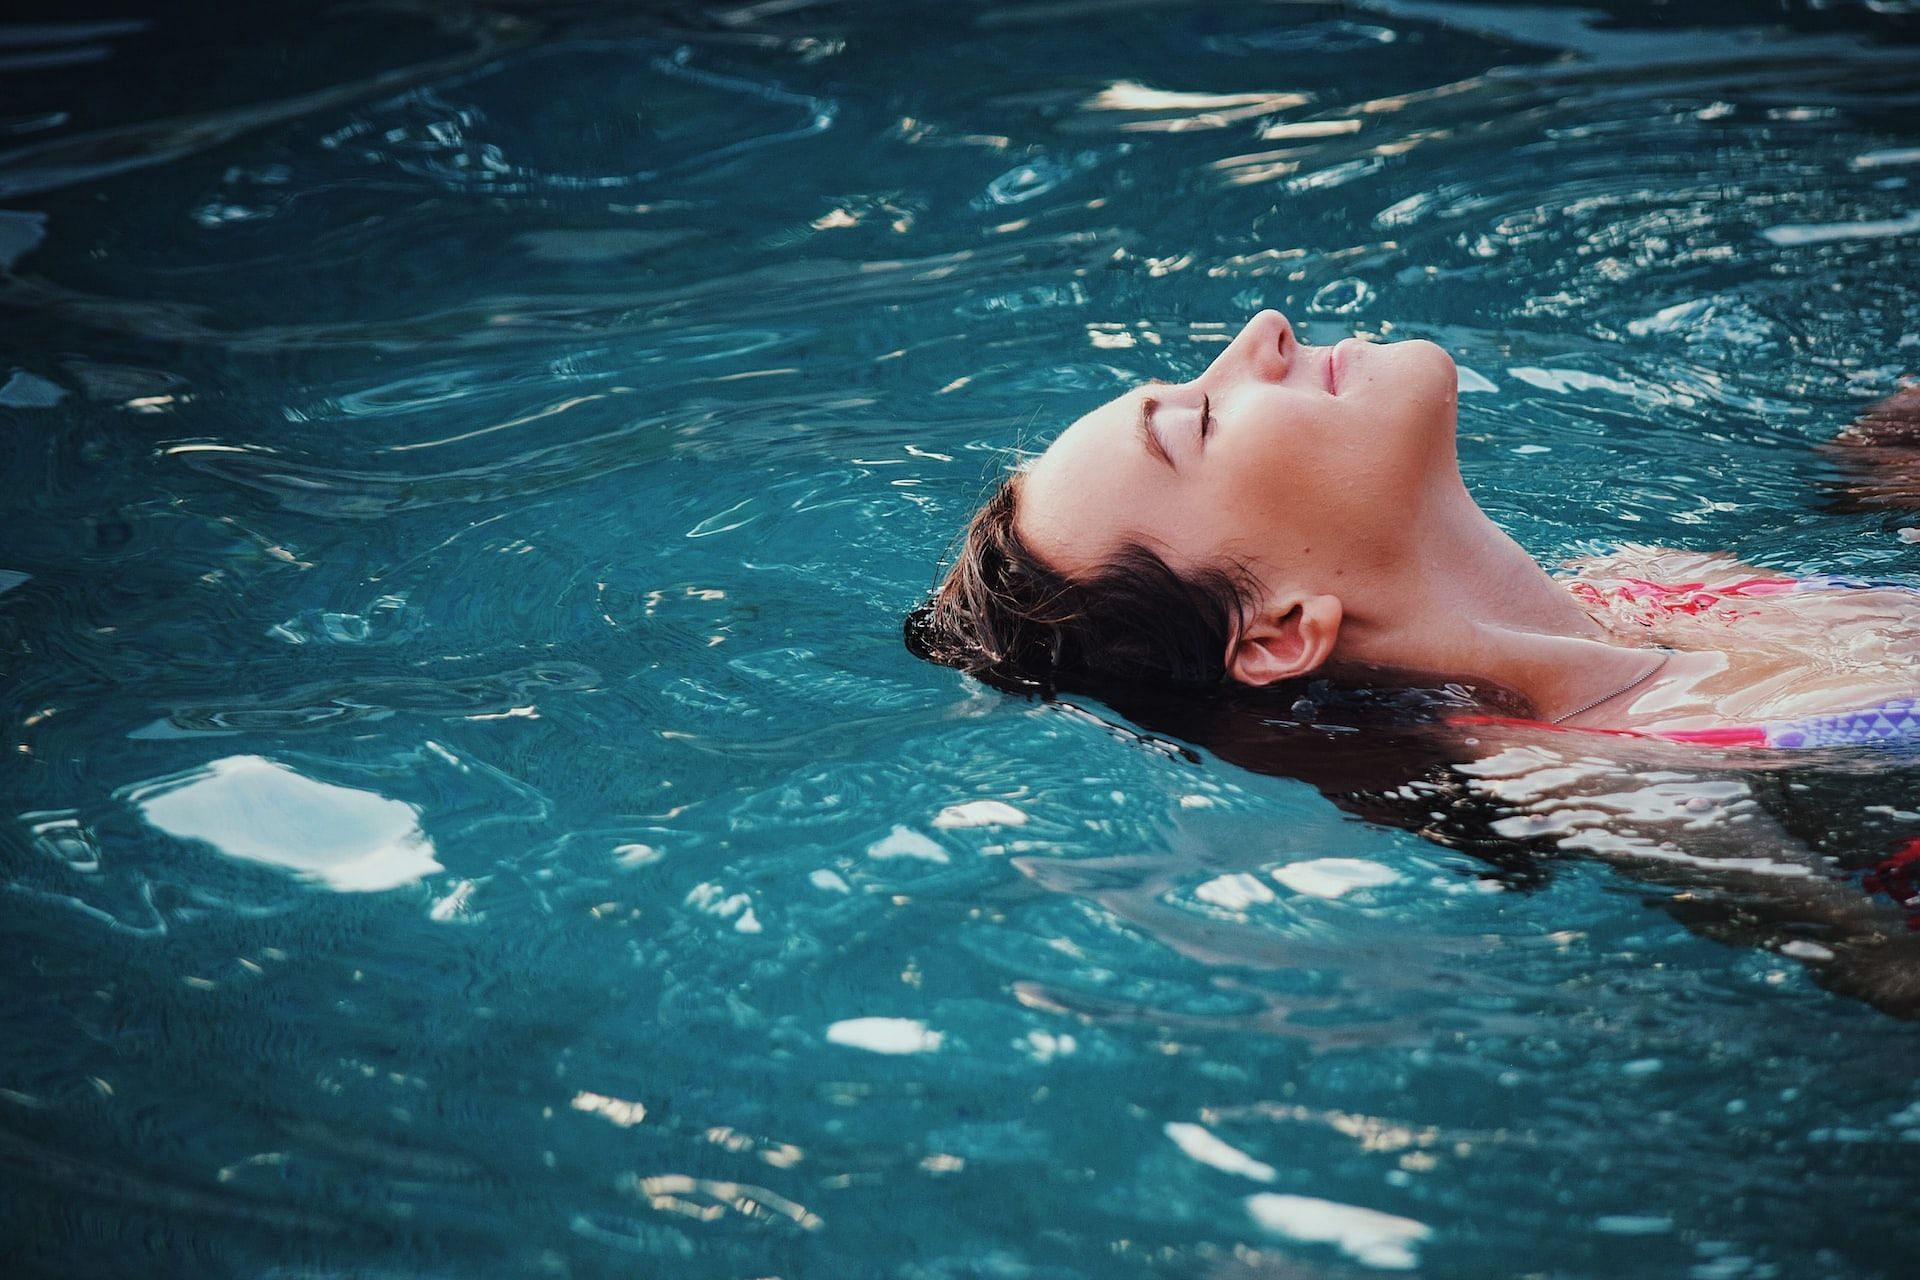 Swimming can help you get rid of distractions. (Photo via Unsplash/Haley Phelps)